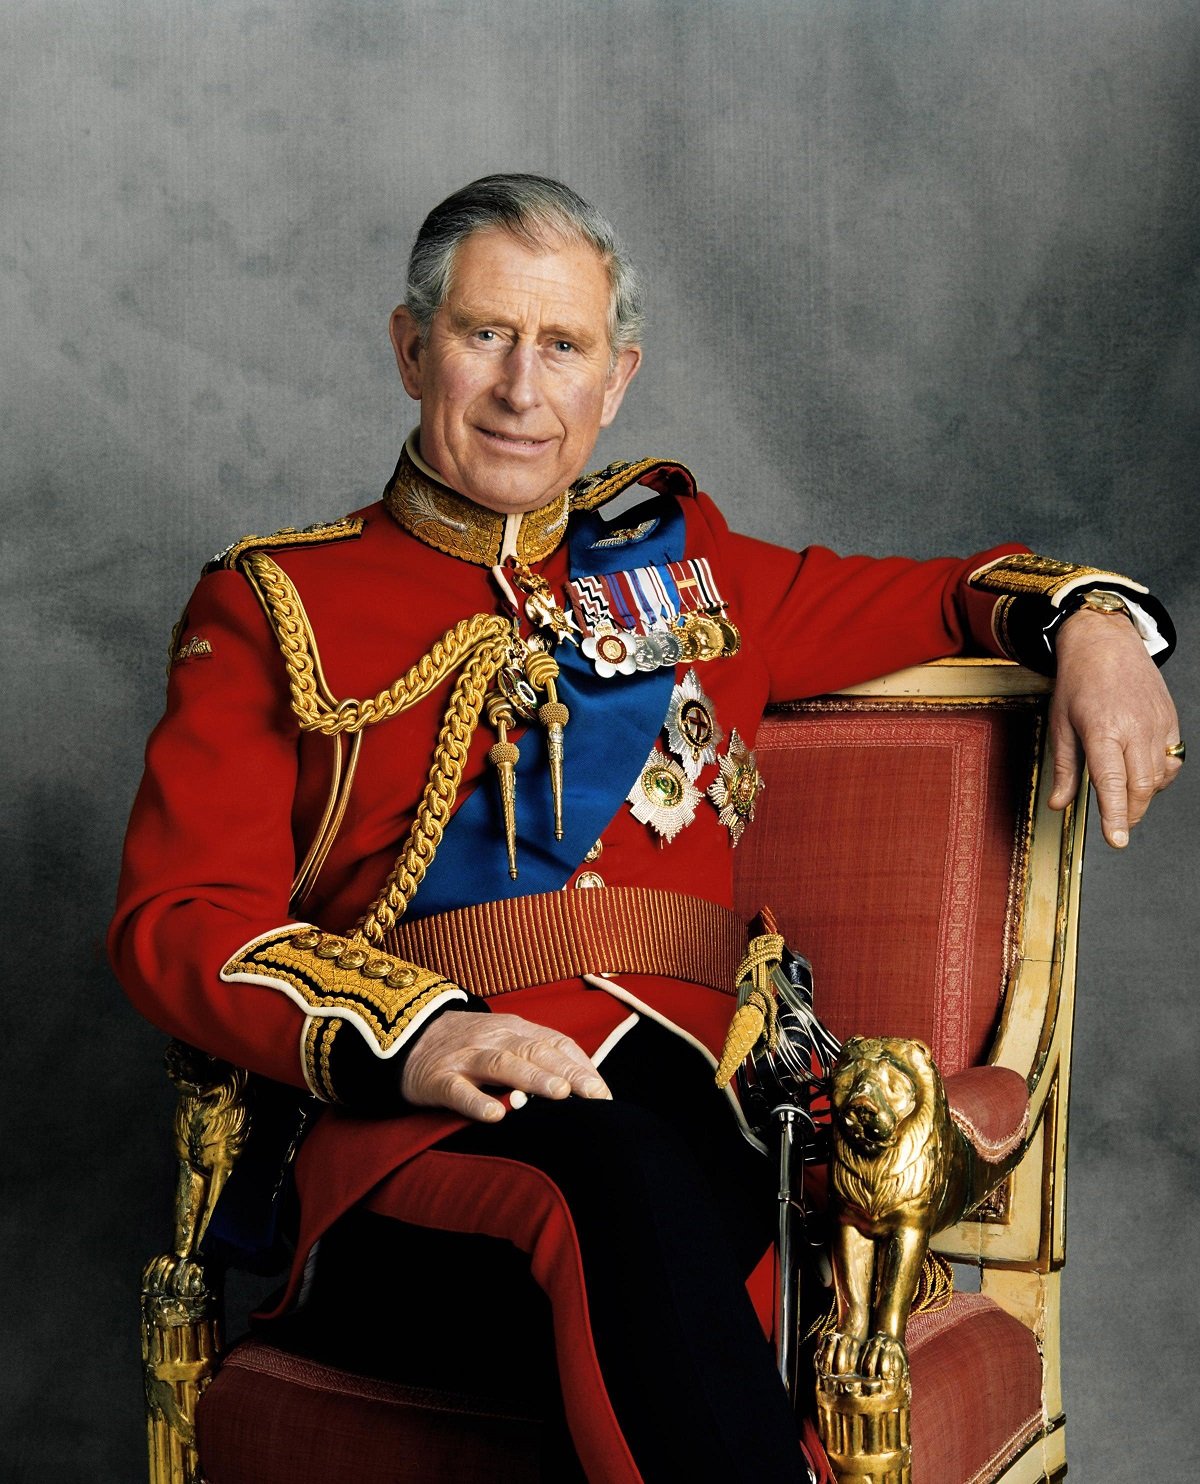 Prince Charles (now King Charles III) posing for an official birthday portrait